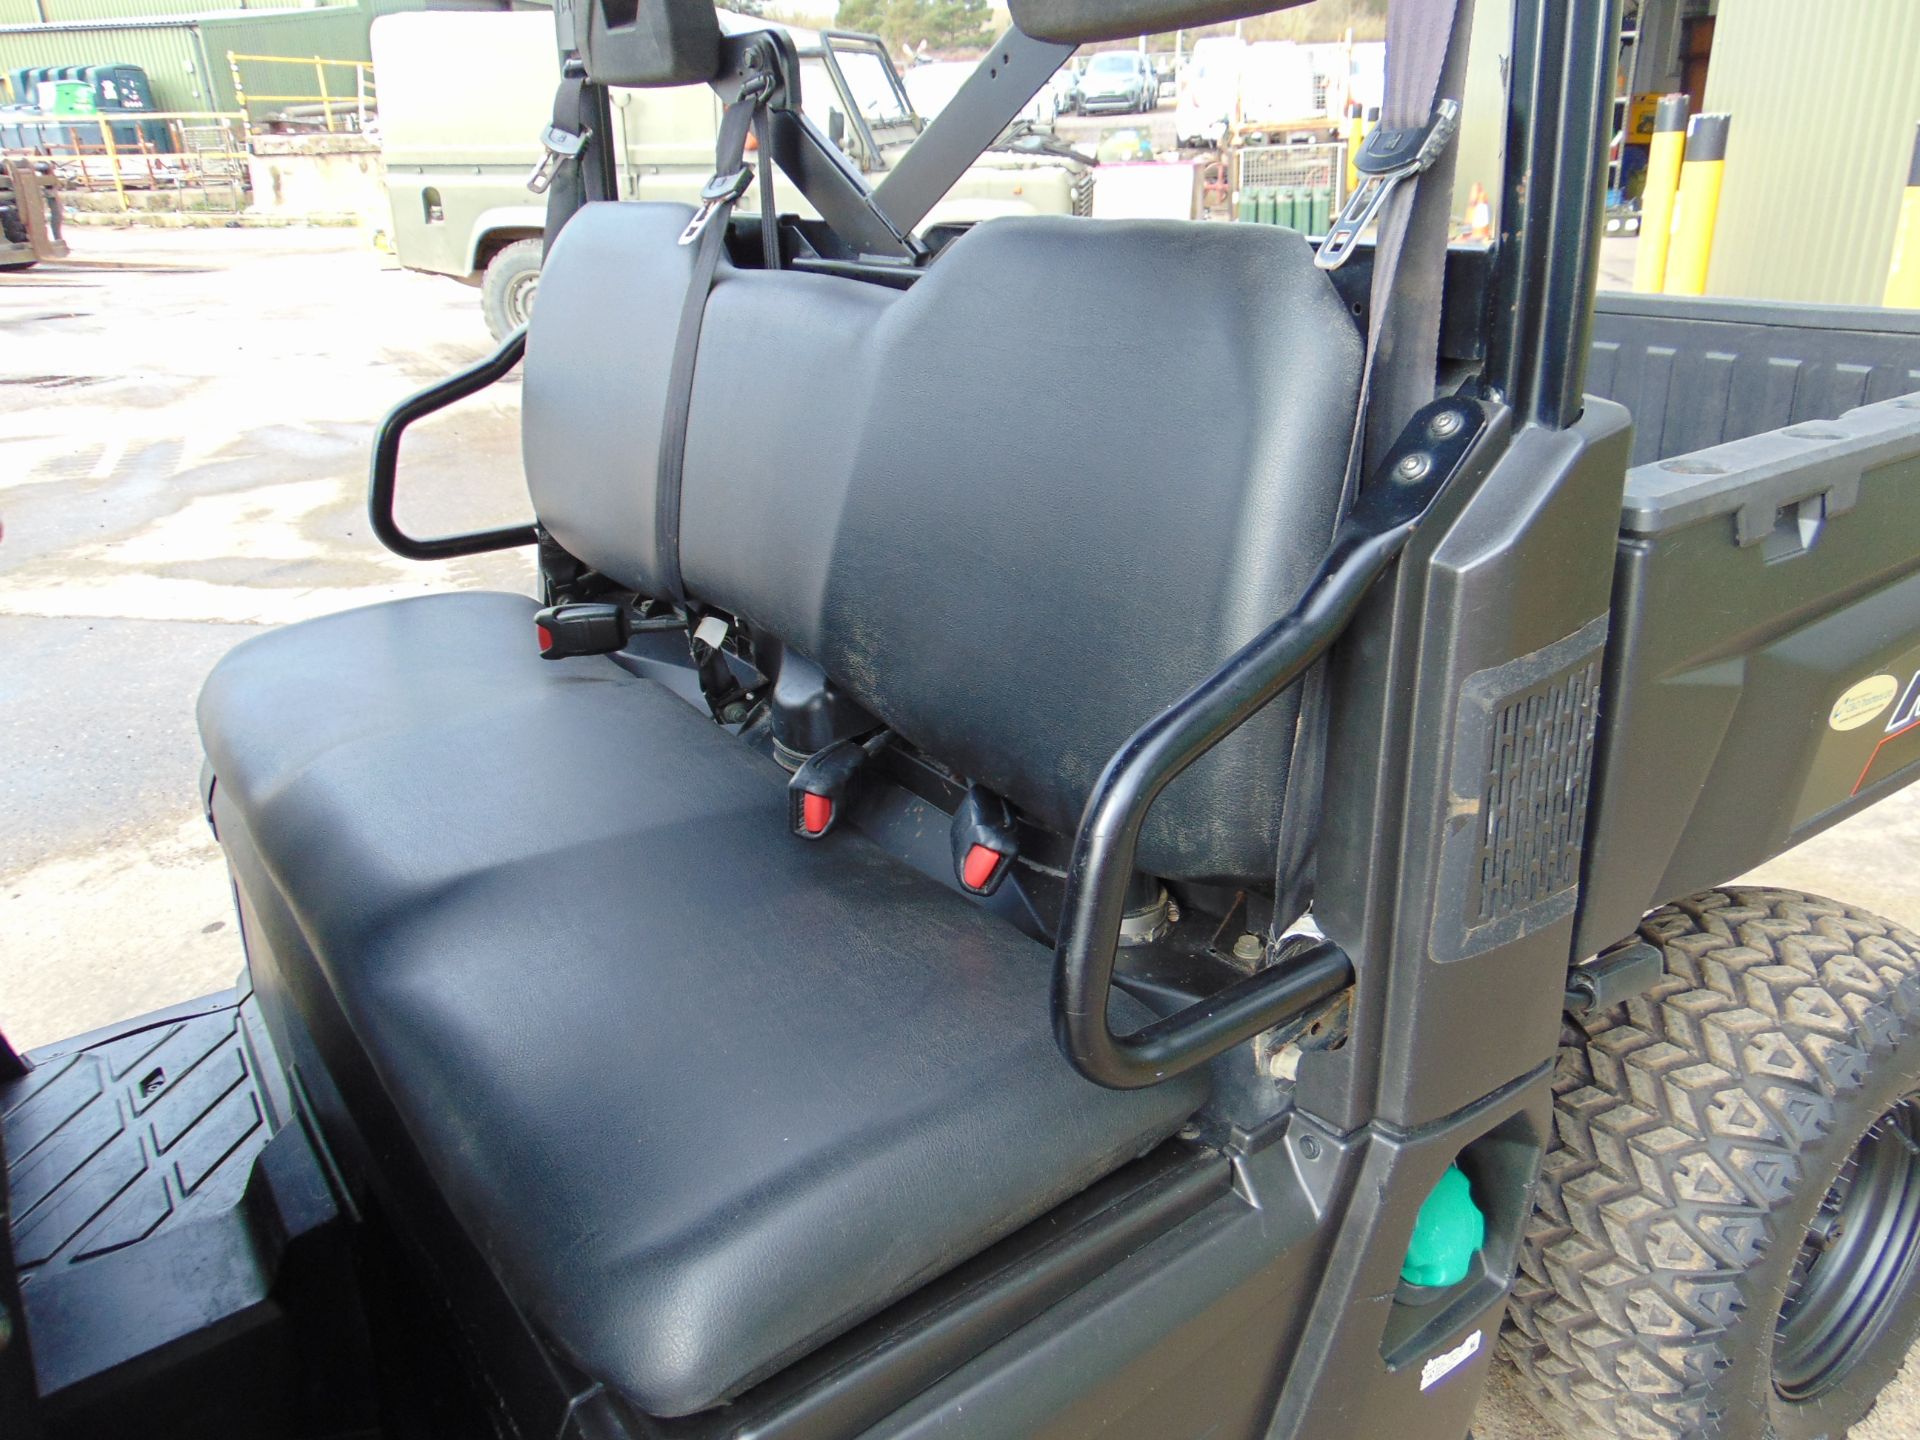 Polaris Ranger Crew Cab Diesel Utility Vehicle 1,190 Hrs only from Govt Dept - Image 17 of 25